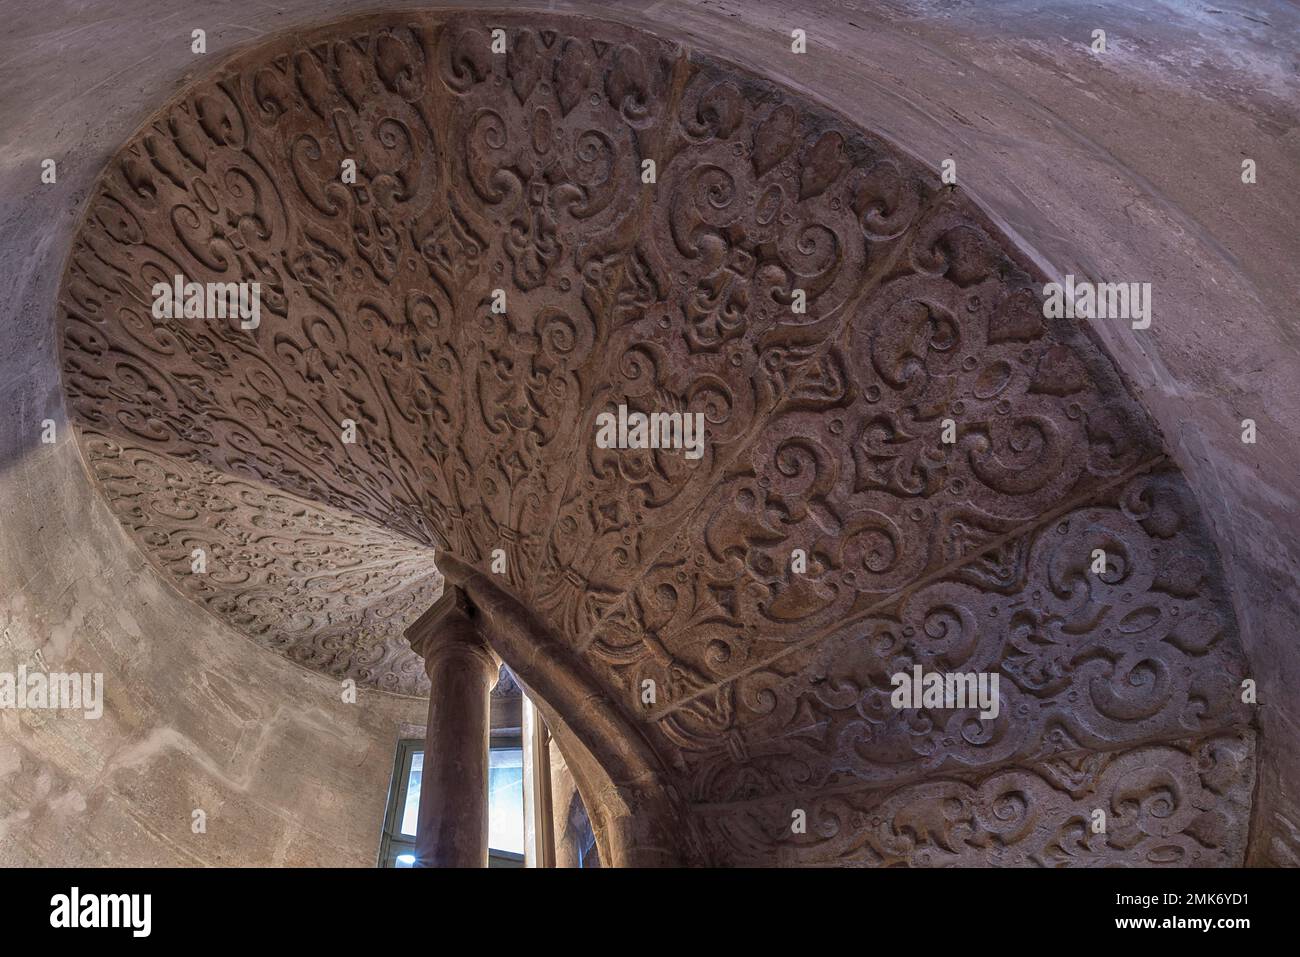 Ceiling relief in the stair tower of the Pellerhaus, built in 1605 by the merchant Martin Peller, Nuremberg, Middle Franconia, Bavaria, Germany Stock Photo